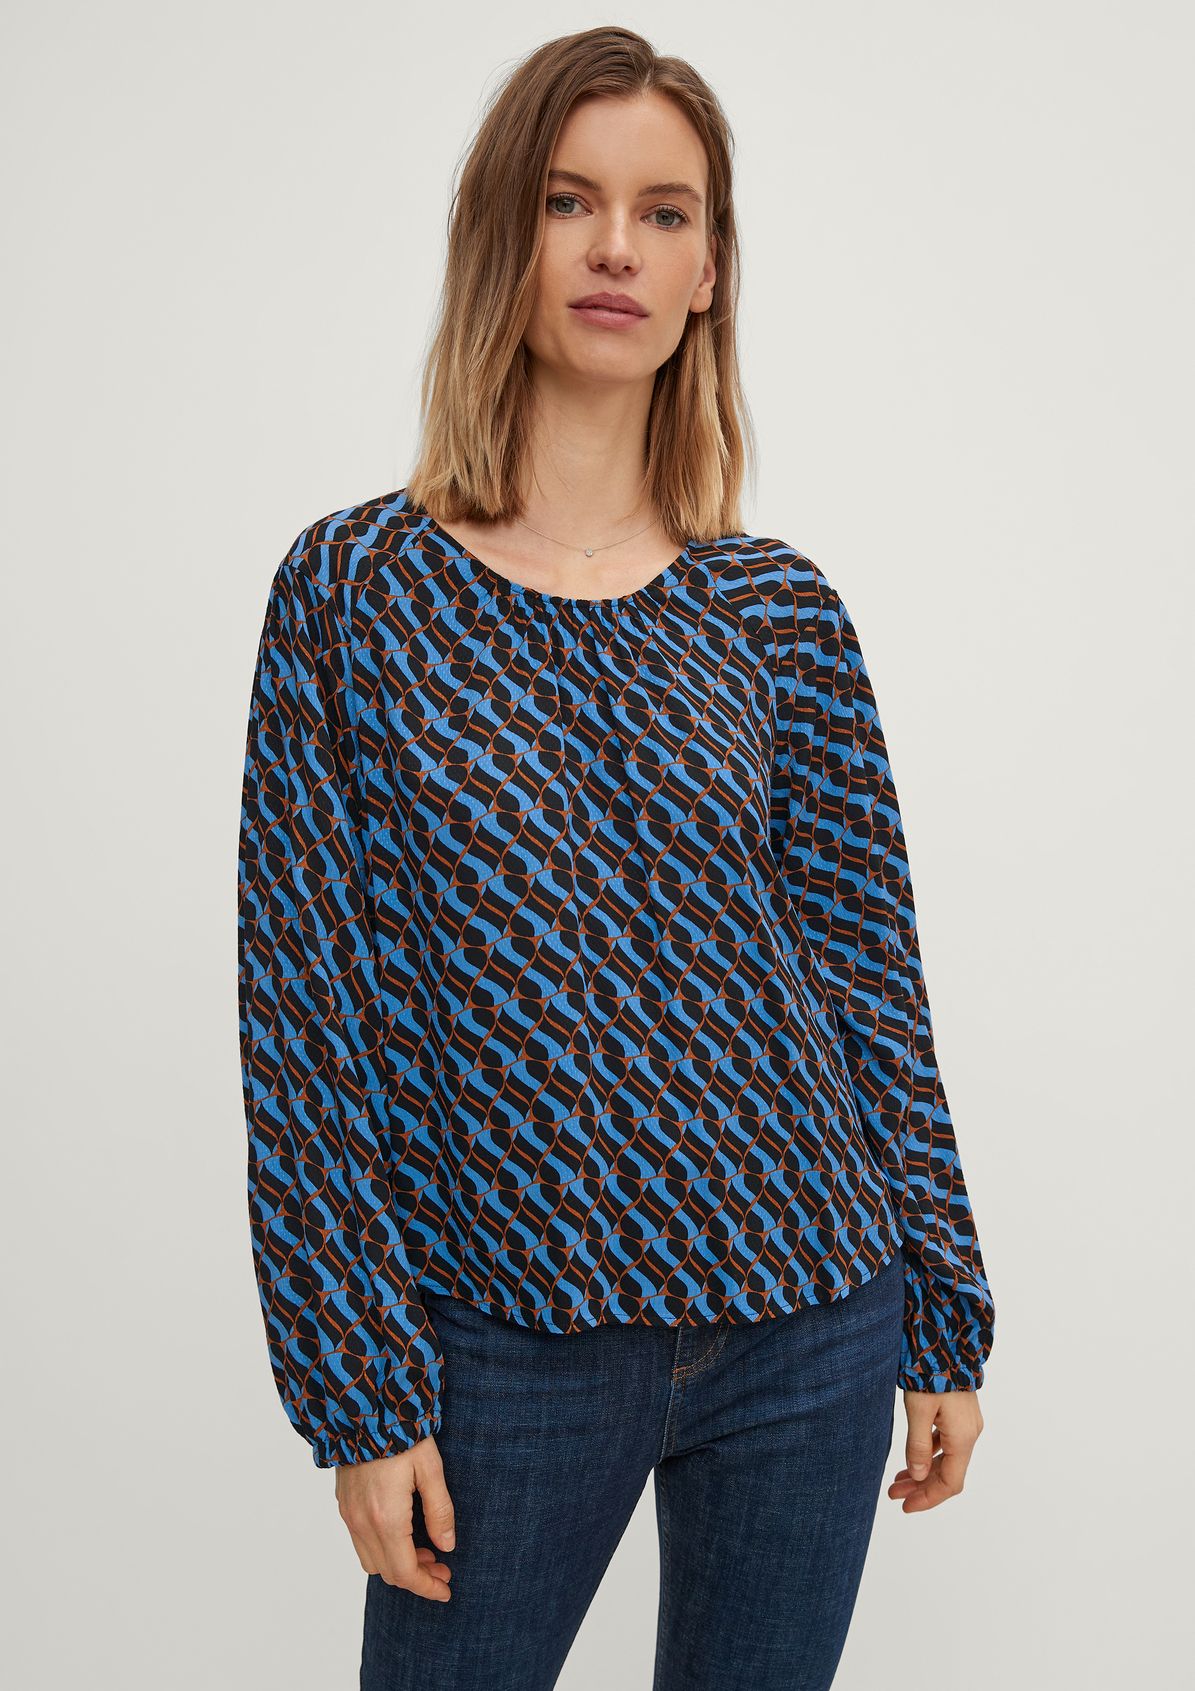 Breezy, textured blouse from comma